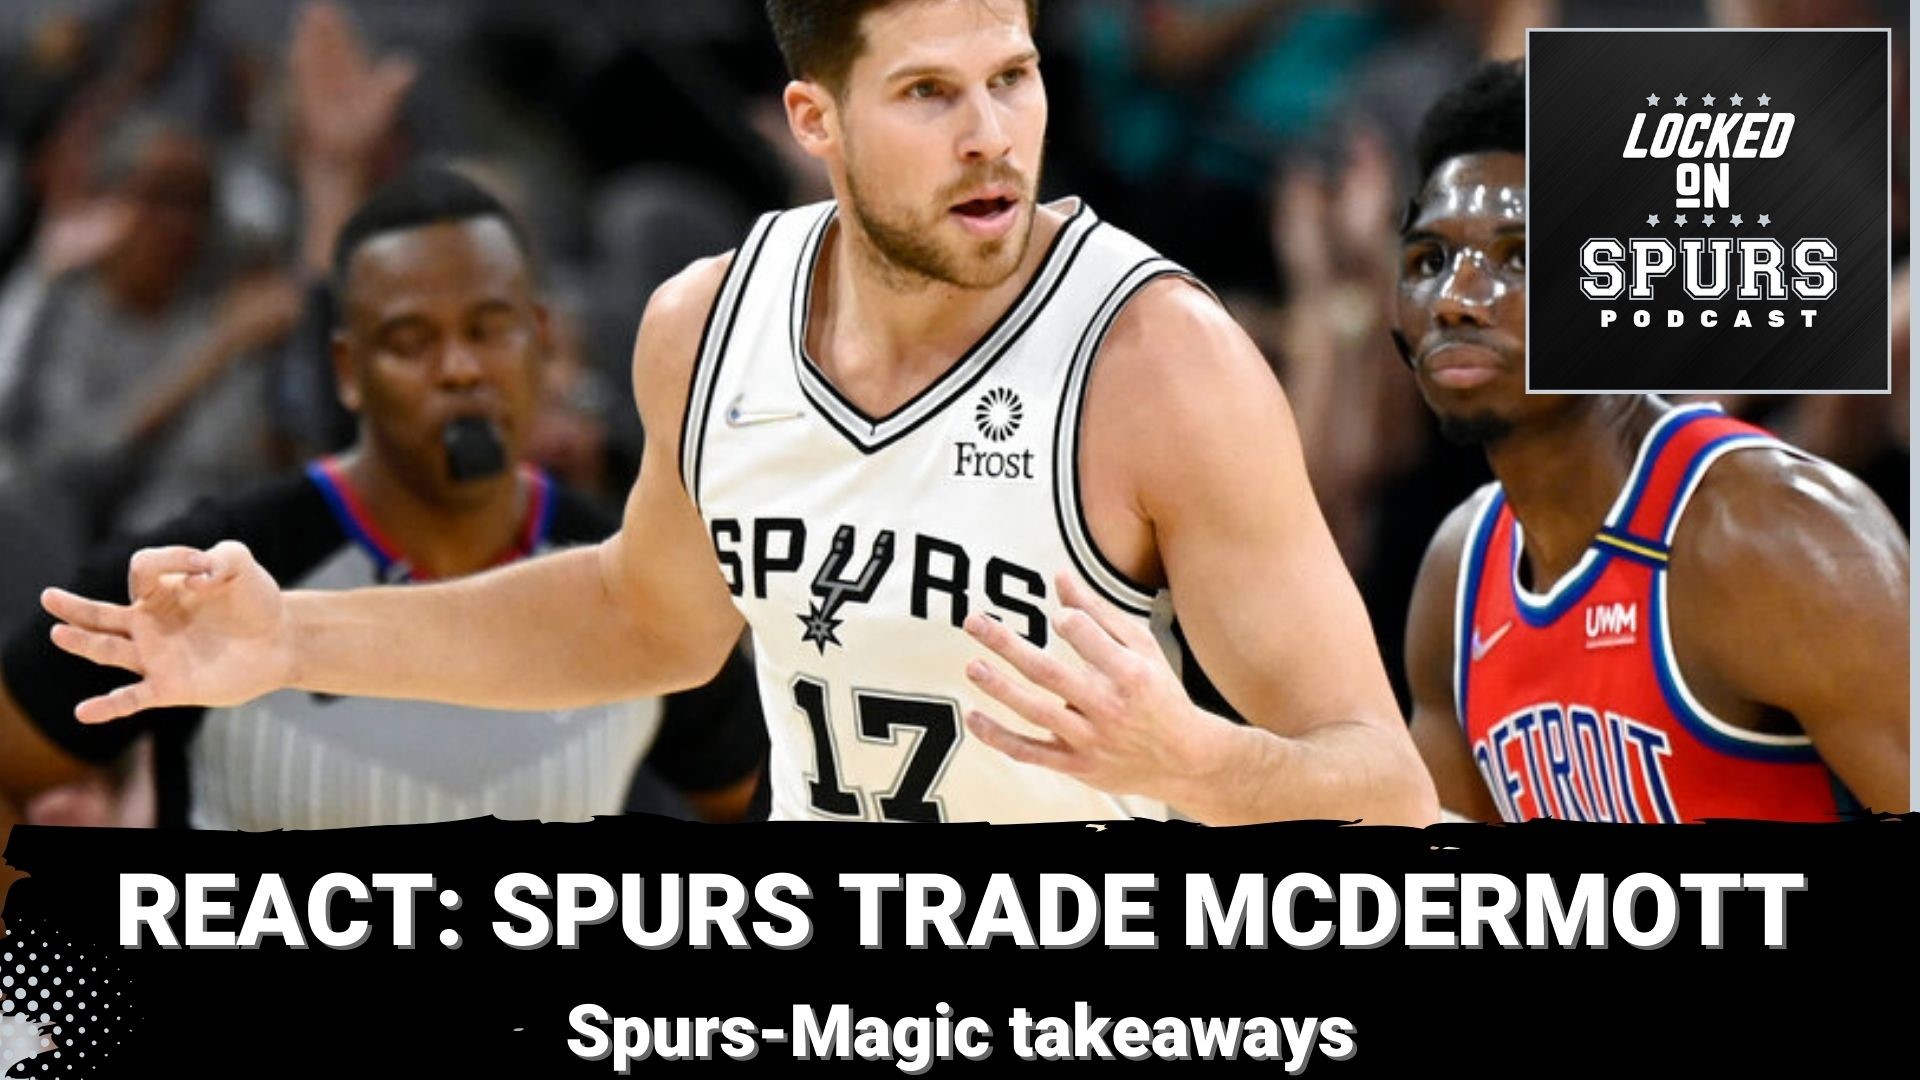 The Spurs send McDermott to the Pacers at the NBA Trade Deadline.